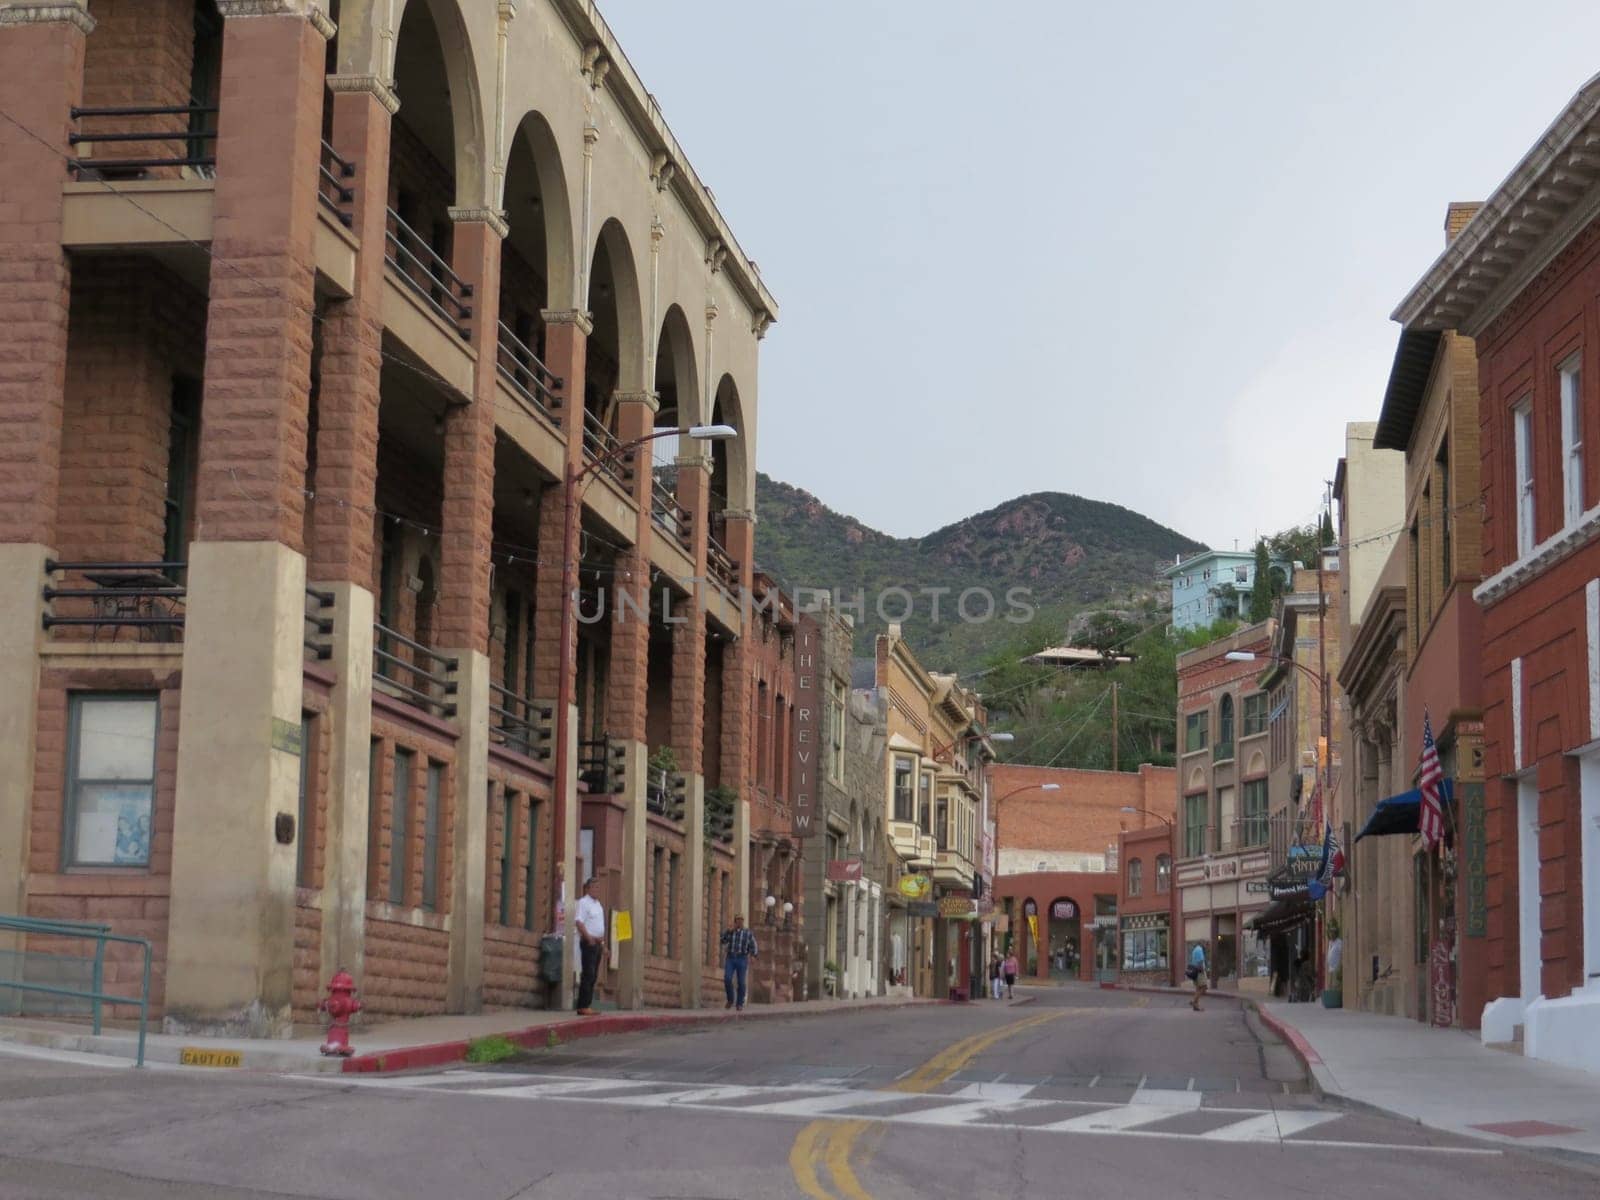 Historic Downtown Bisbee Arizona, former Copper Mining Town. High quality photo